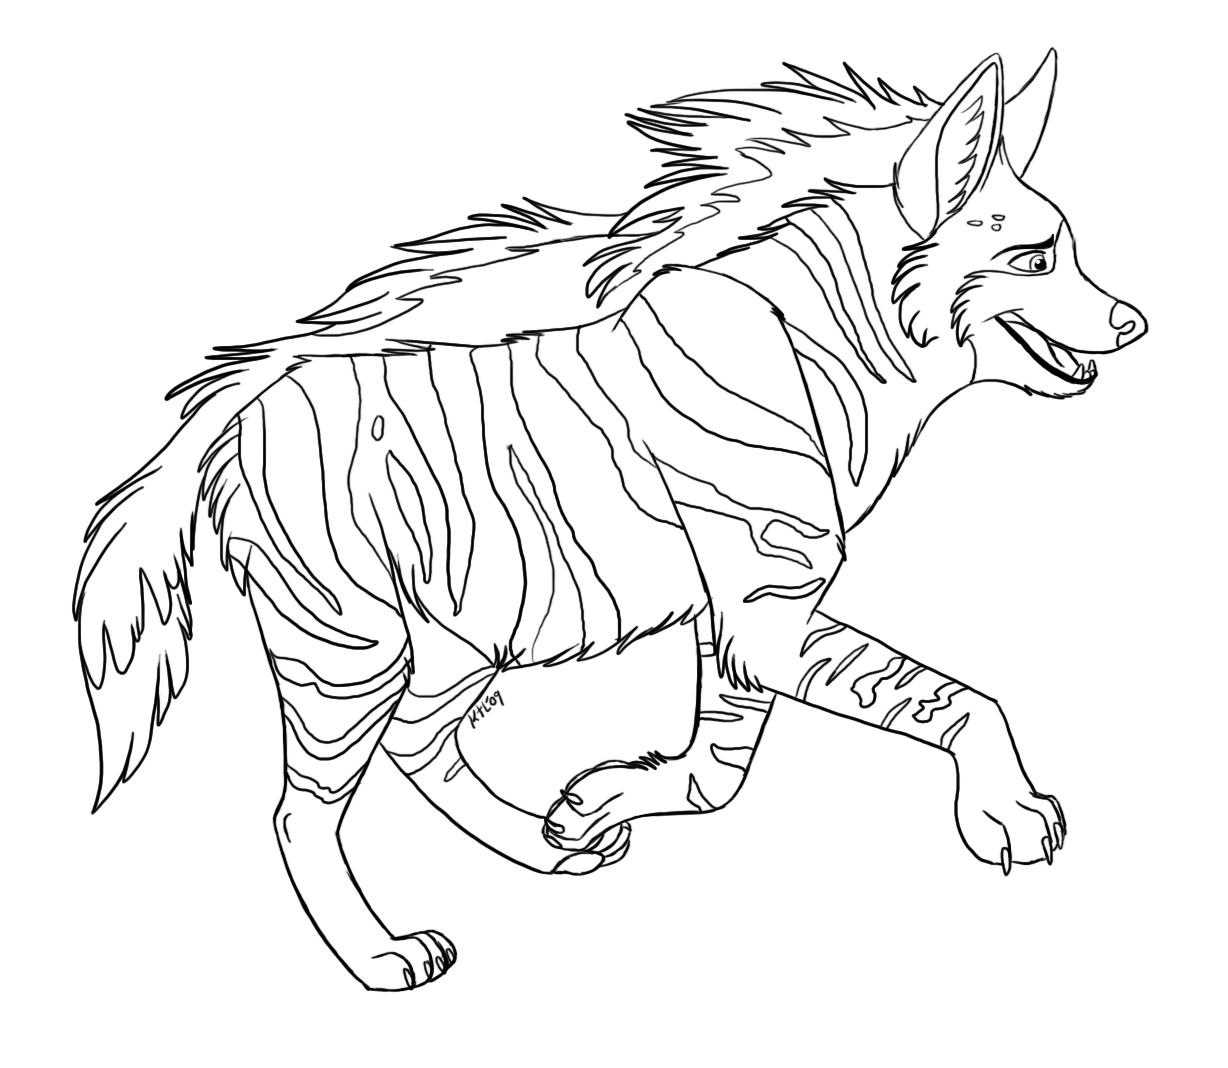 Striped_Hyena_Line_Art_by_Greykitty.png